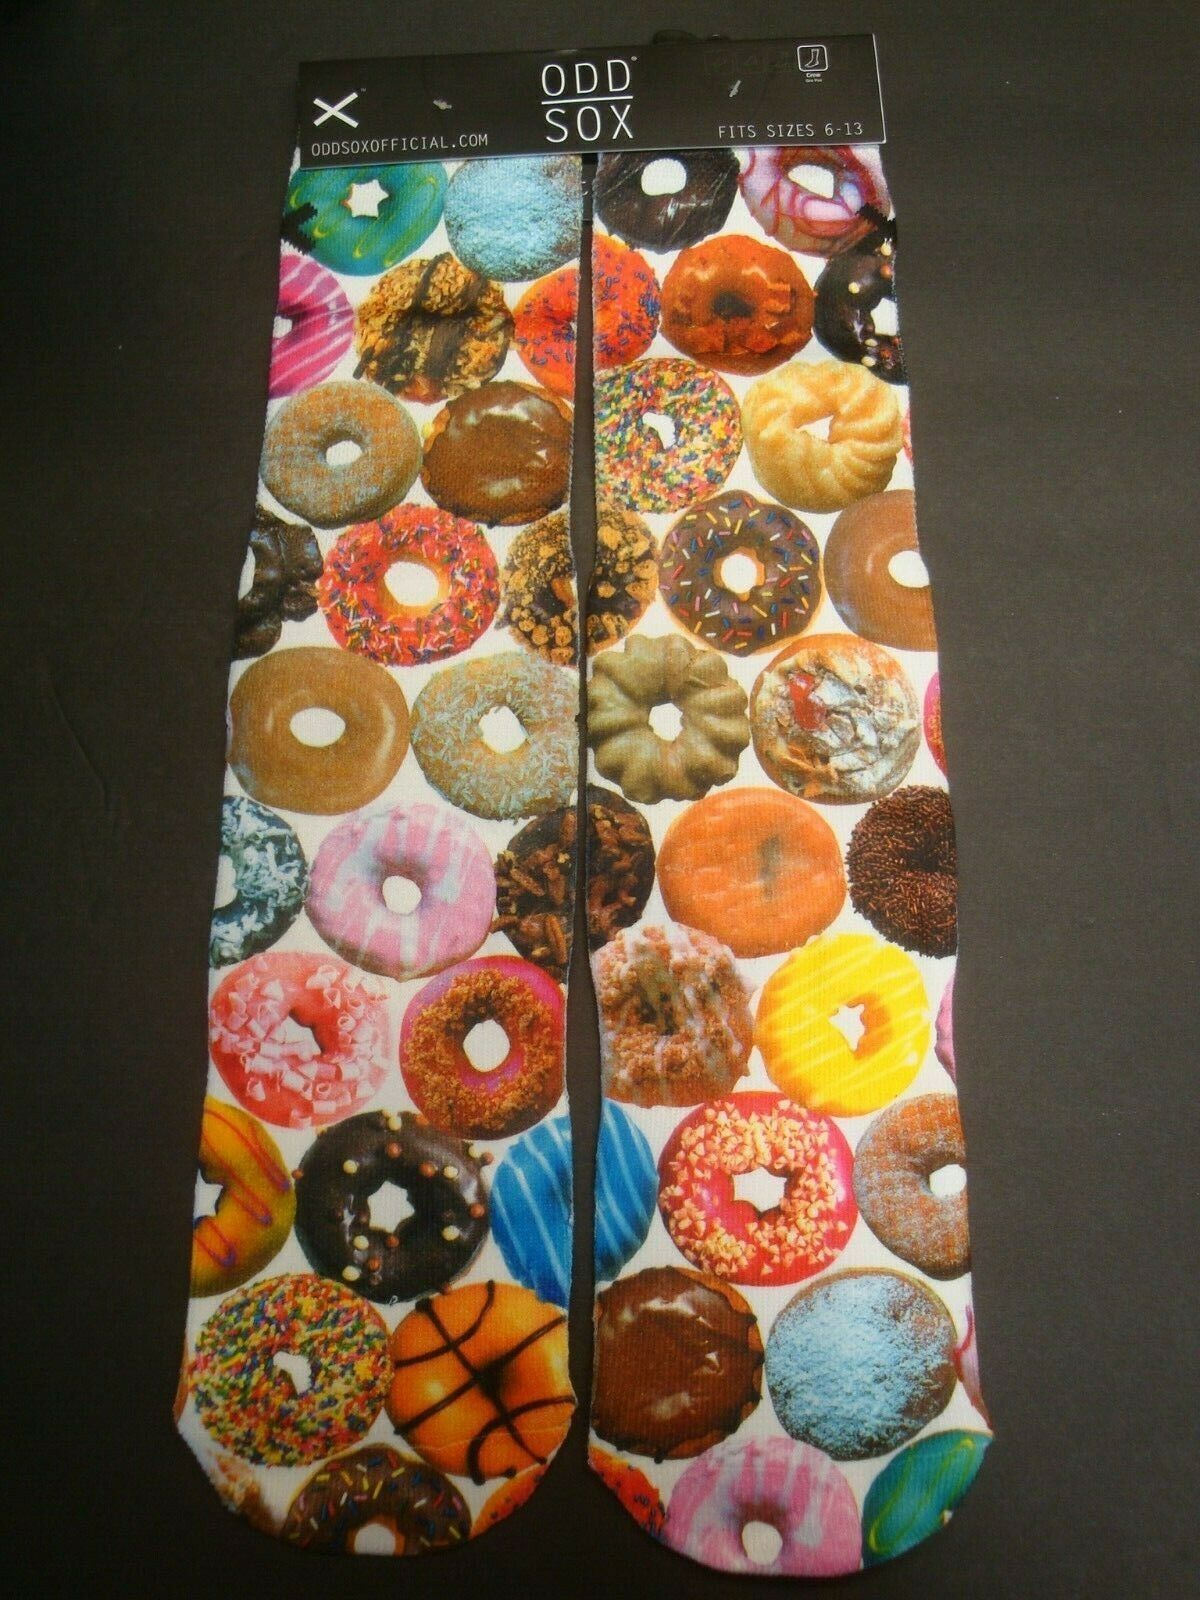 New Odd Sox Men's Poly Blend Crew Socks All Over Donuts Multi One Size 6-13 - $14.84